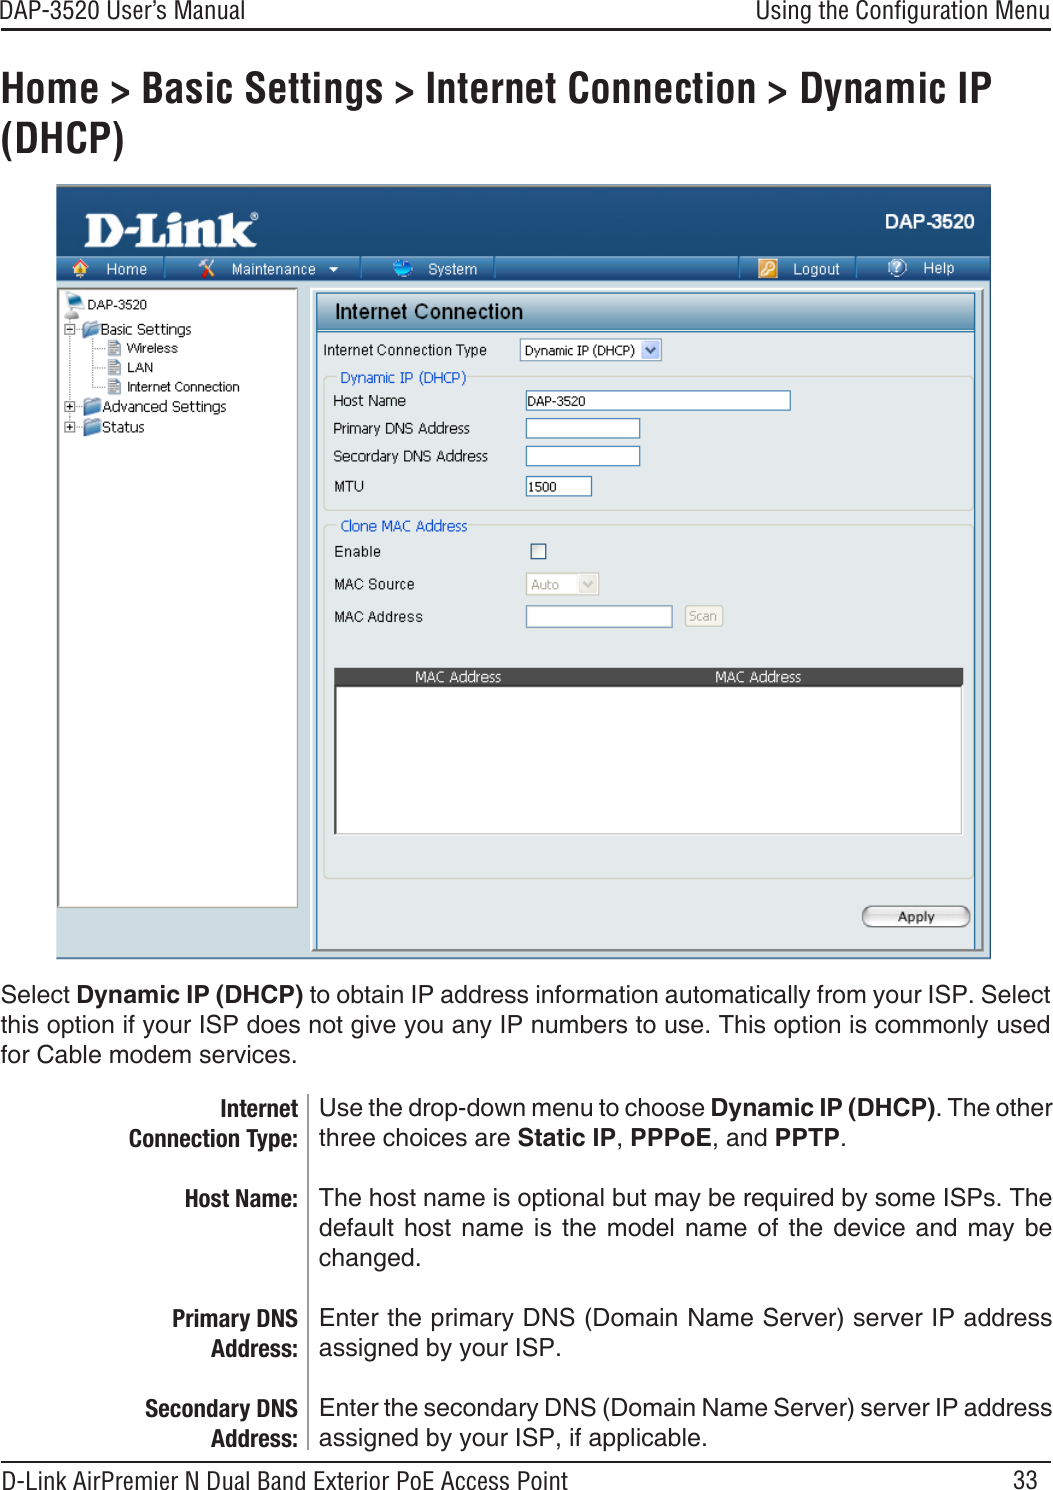 33DAP-3520 User’s Manual D-Link AirPremier N Dual Band Exterior PoE Access PointHome &gt; Basic Settings &gt; Internet Connection &gt; Dynamic IP (DHCP)Use the drop-down menu to choose Dynamic IP (DHCP). The other three choices are Static IP, PPPoE, and PPTP. The host name is optional but may be required by some ISPs. The default  host  name  is the model name of the device  and  may  be changed.Enter the primary DNS (Domain Name Server) server IP address assigned by your ISP.Enter the secondary DNS (Domain Name Server) server IP address assigned by your ISP, if applicable.Internet Connection Type:Host Name:Primary DNS Address:Secondary DNS Address:Select Dynamic IP (DHCP) to obtain IP address information automatically from your ISP. Select this option if your ISP does not give you any IP numbers to use. This option is commonly used for Cable modem services.Using the Conﬁguration Menu